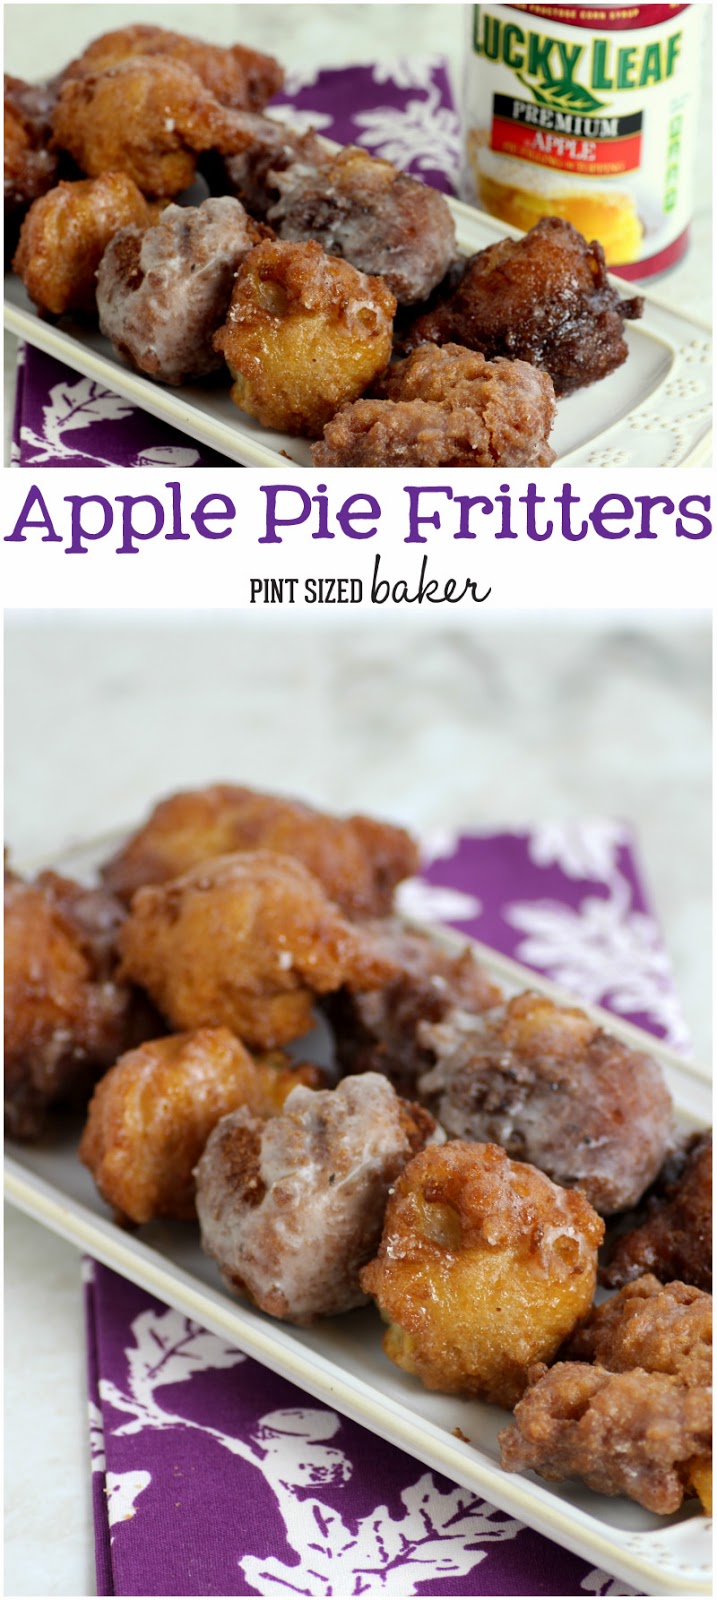 Homemade Apple Pie Fritters. Easier than you think and cheaper than buying them. #BakeThisHolidaySpecial